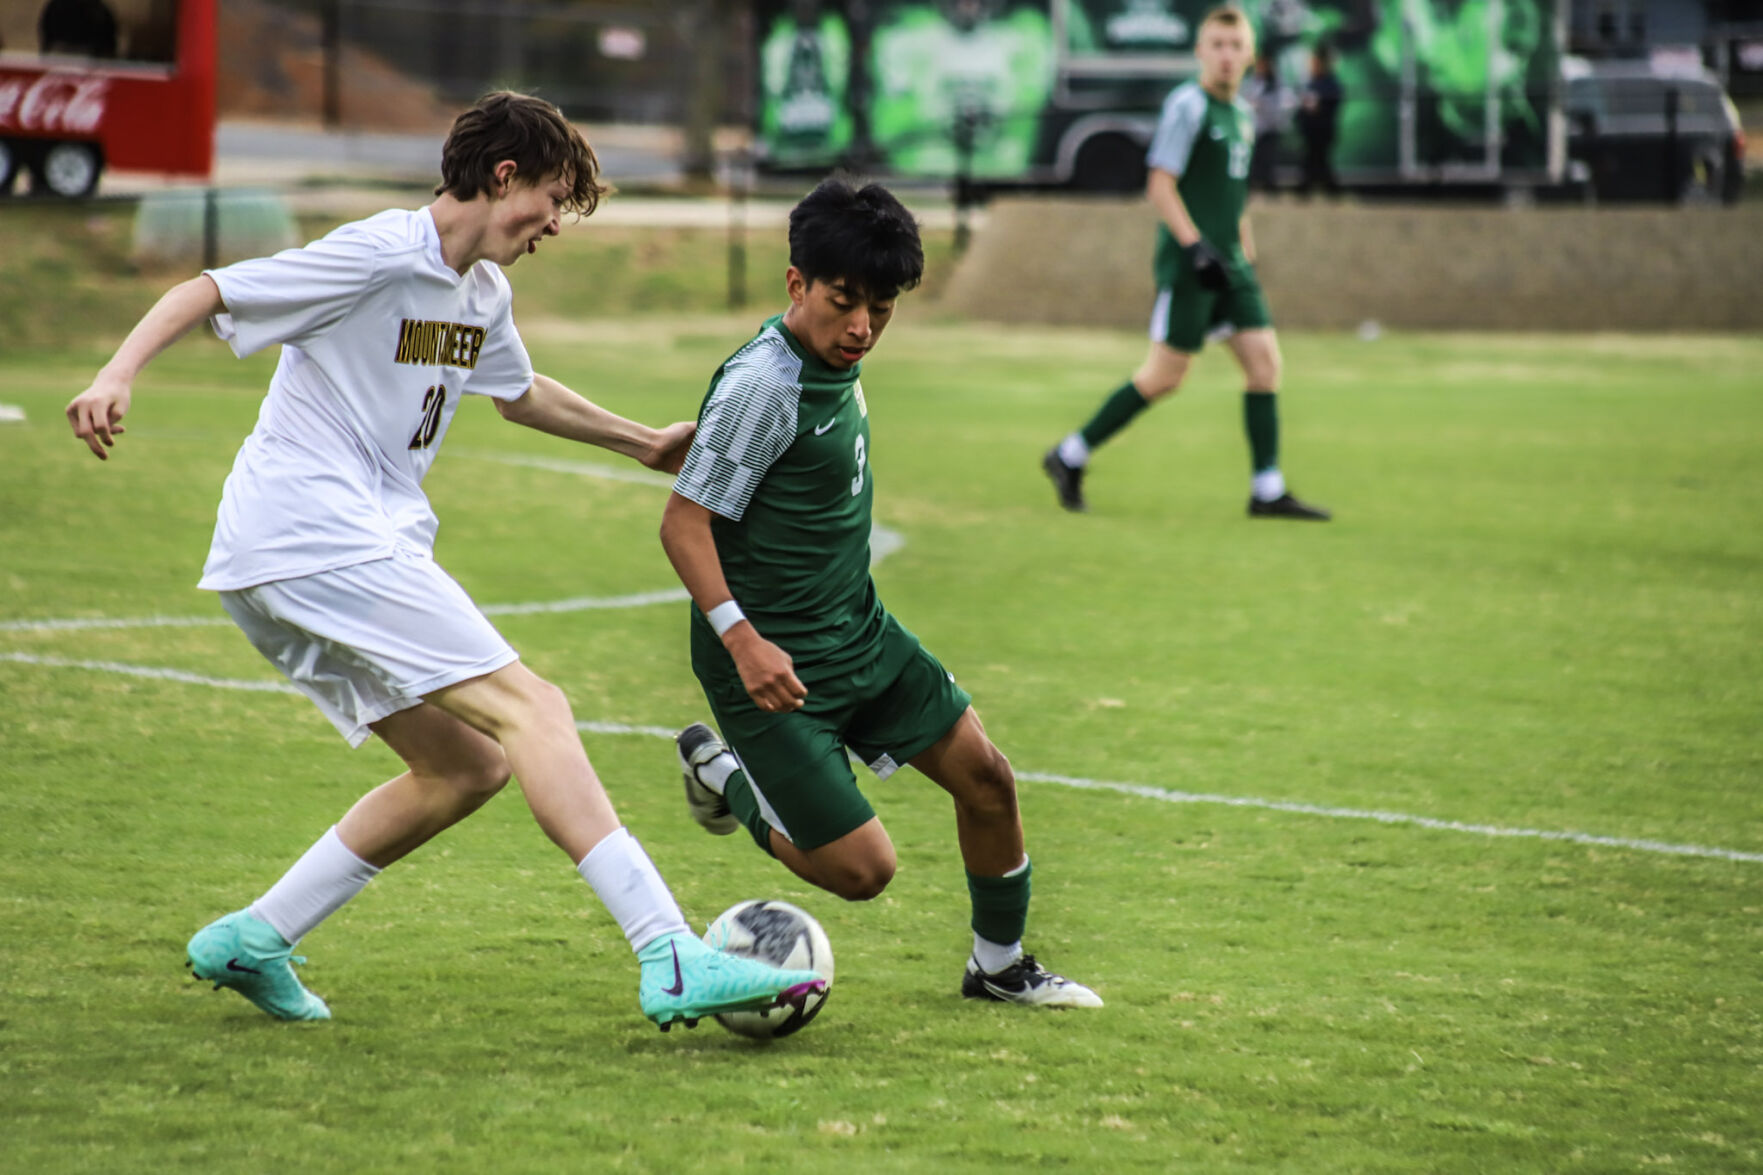 High school soccer results: Murray County triumphs over North Murray on penalty kicks, Dalton Academy shines with 10-0 win vs Chattooga